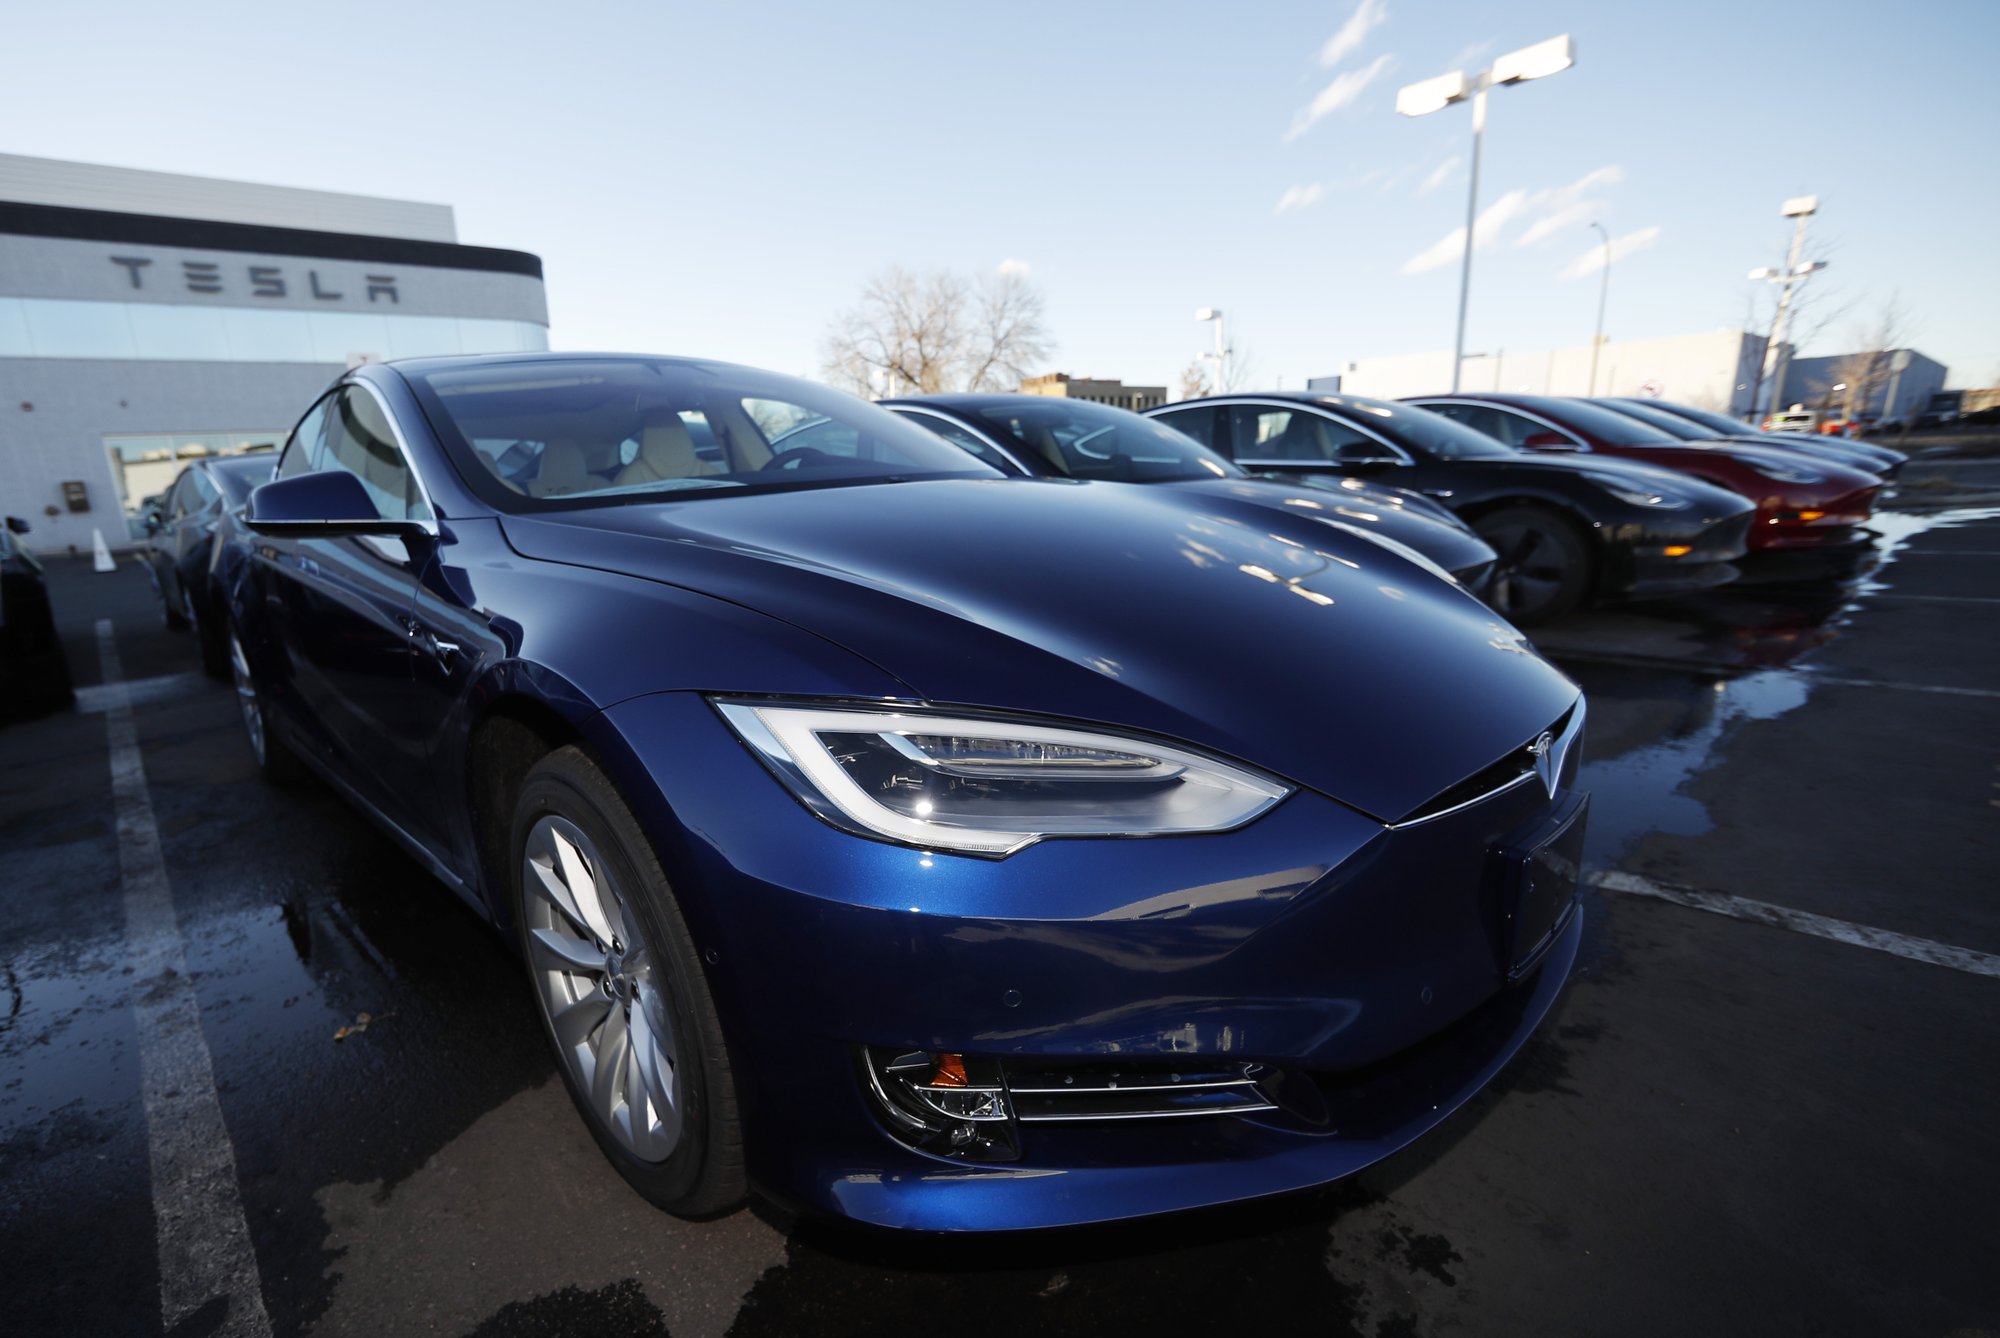 FILE - In this Sunday, Feb. 3, 2019, file photograph, an unsold 2019 S75D sits at a Tesla dealership in Littleton, Colo. Rising trade tensions have sparked worries about the 17 exotic-sounding rare minerals needed for high-tech products like robotics, drones and electric cars. China recently raised tariffs to 25% on rare earth exports to the U.S. and has threatened to halt exports altogether after the Trump administration raised tariffs on Chinese products and blacklisted telecommunications giant Huawei. (AP Photo/David Zalubowski, File)